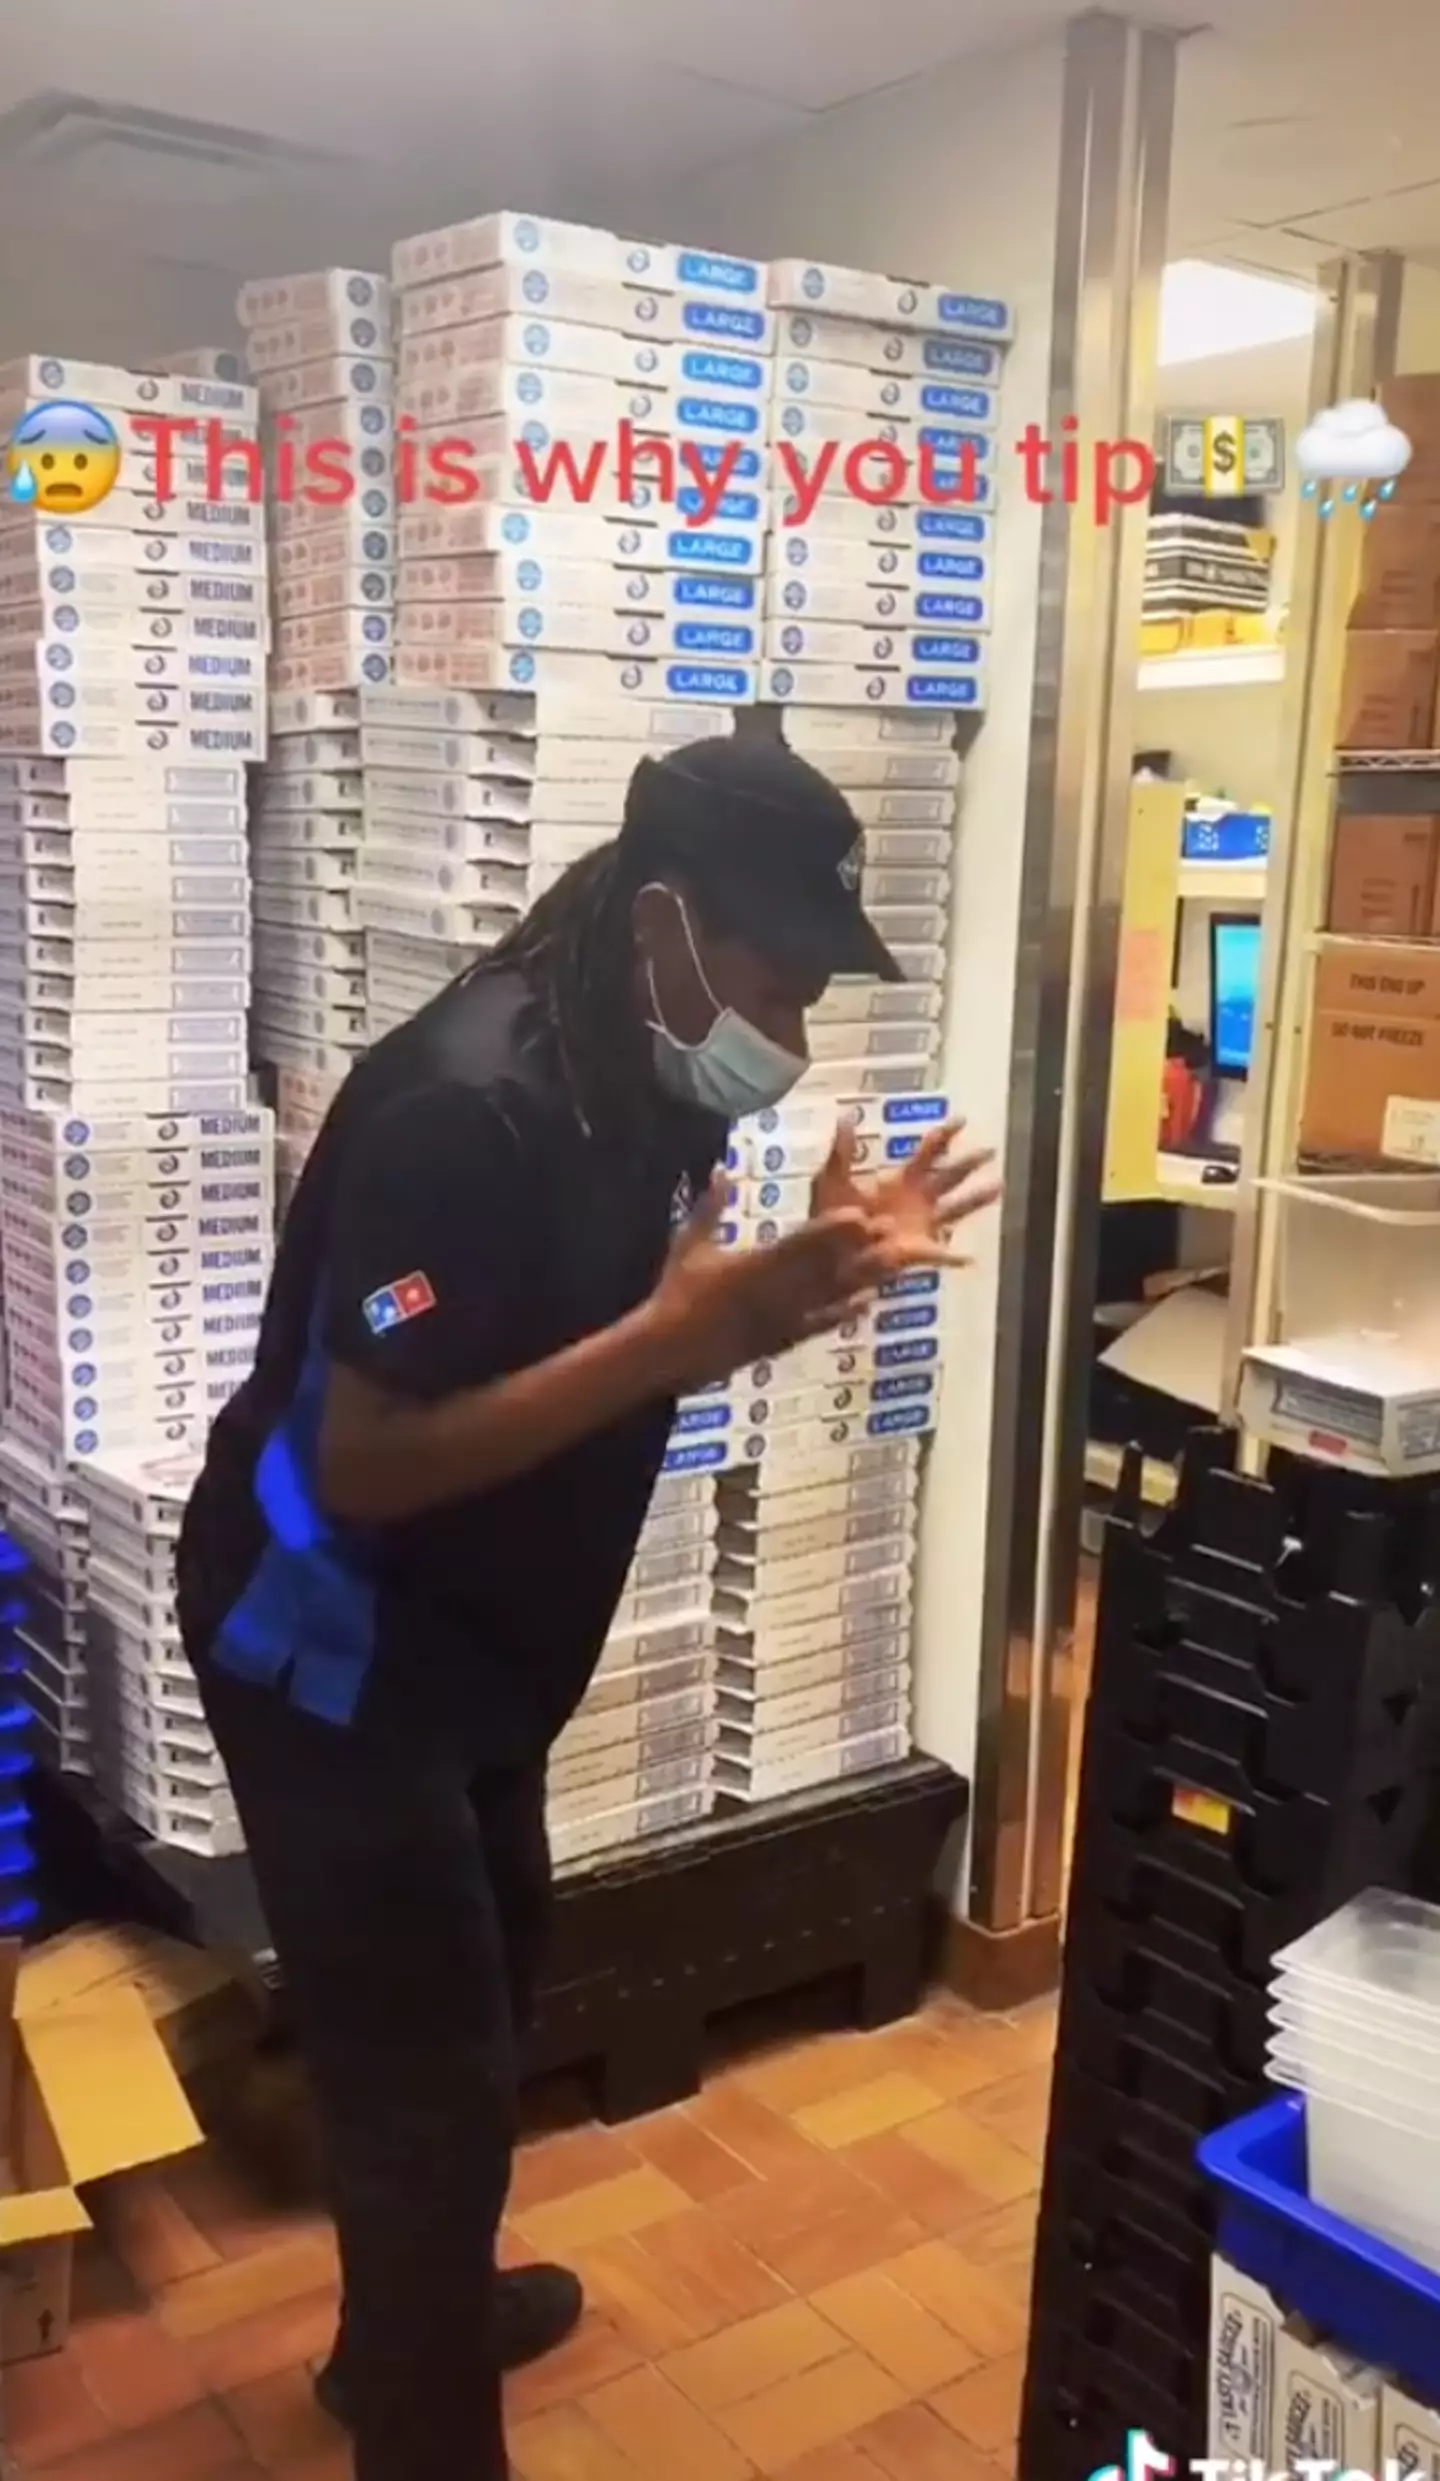 Over summer, footage of another Domino's employee went viral after they appeared to have a meltdown over a tip.